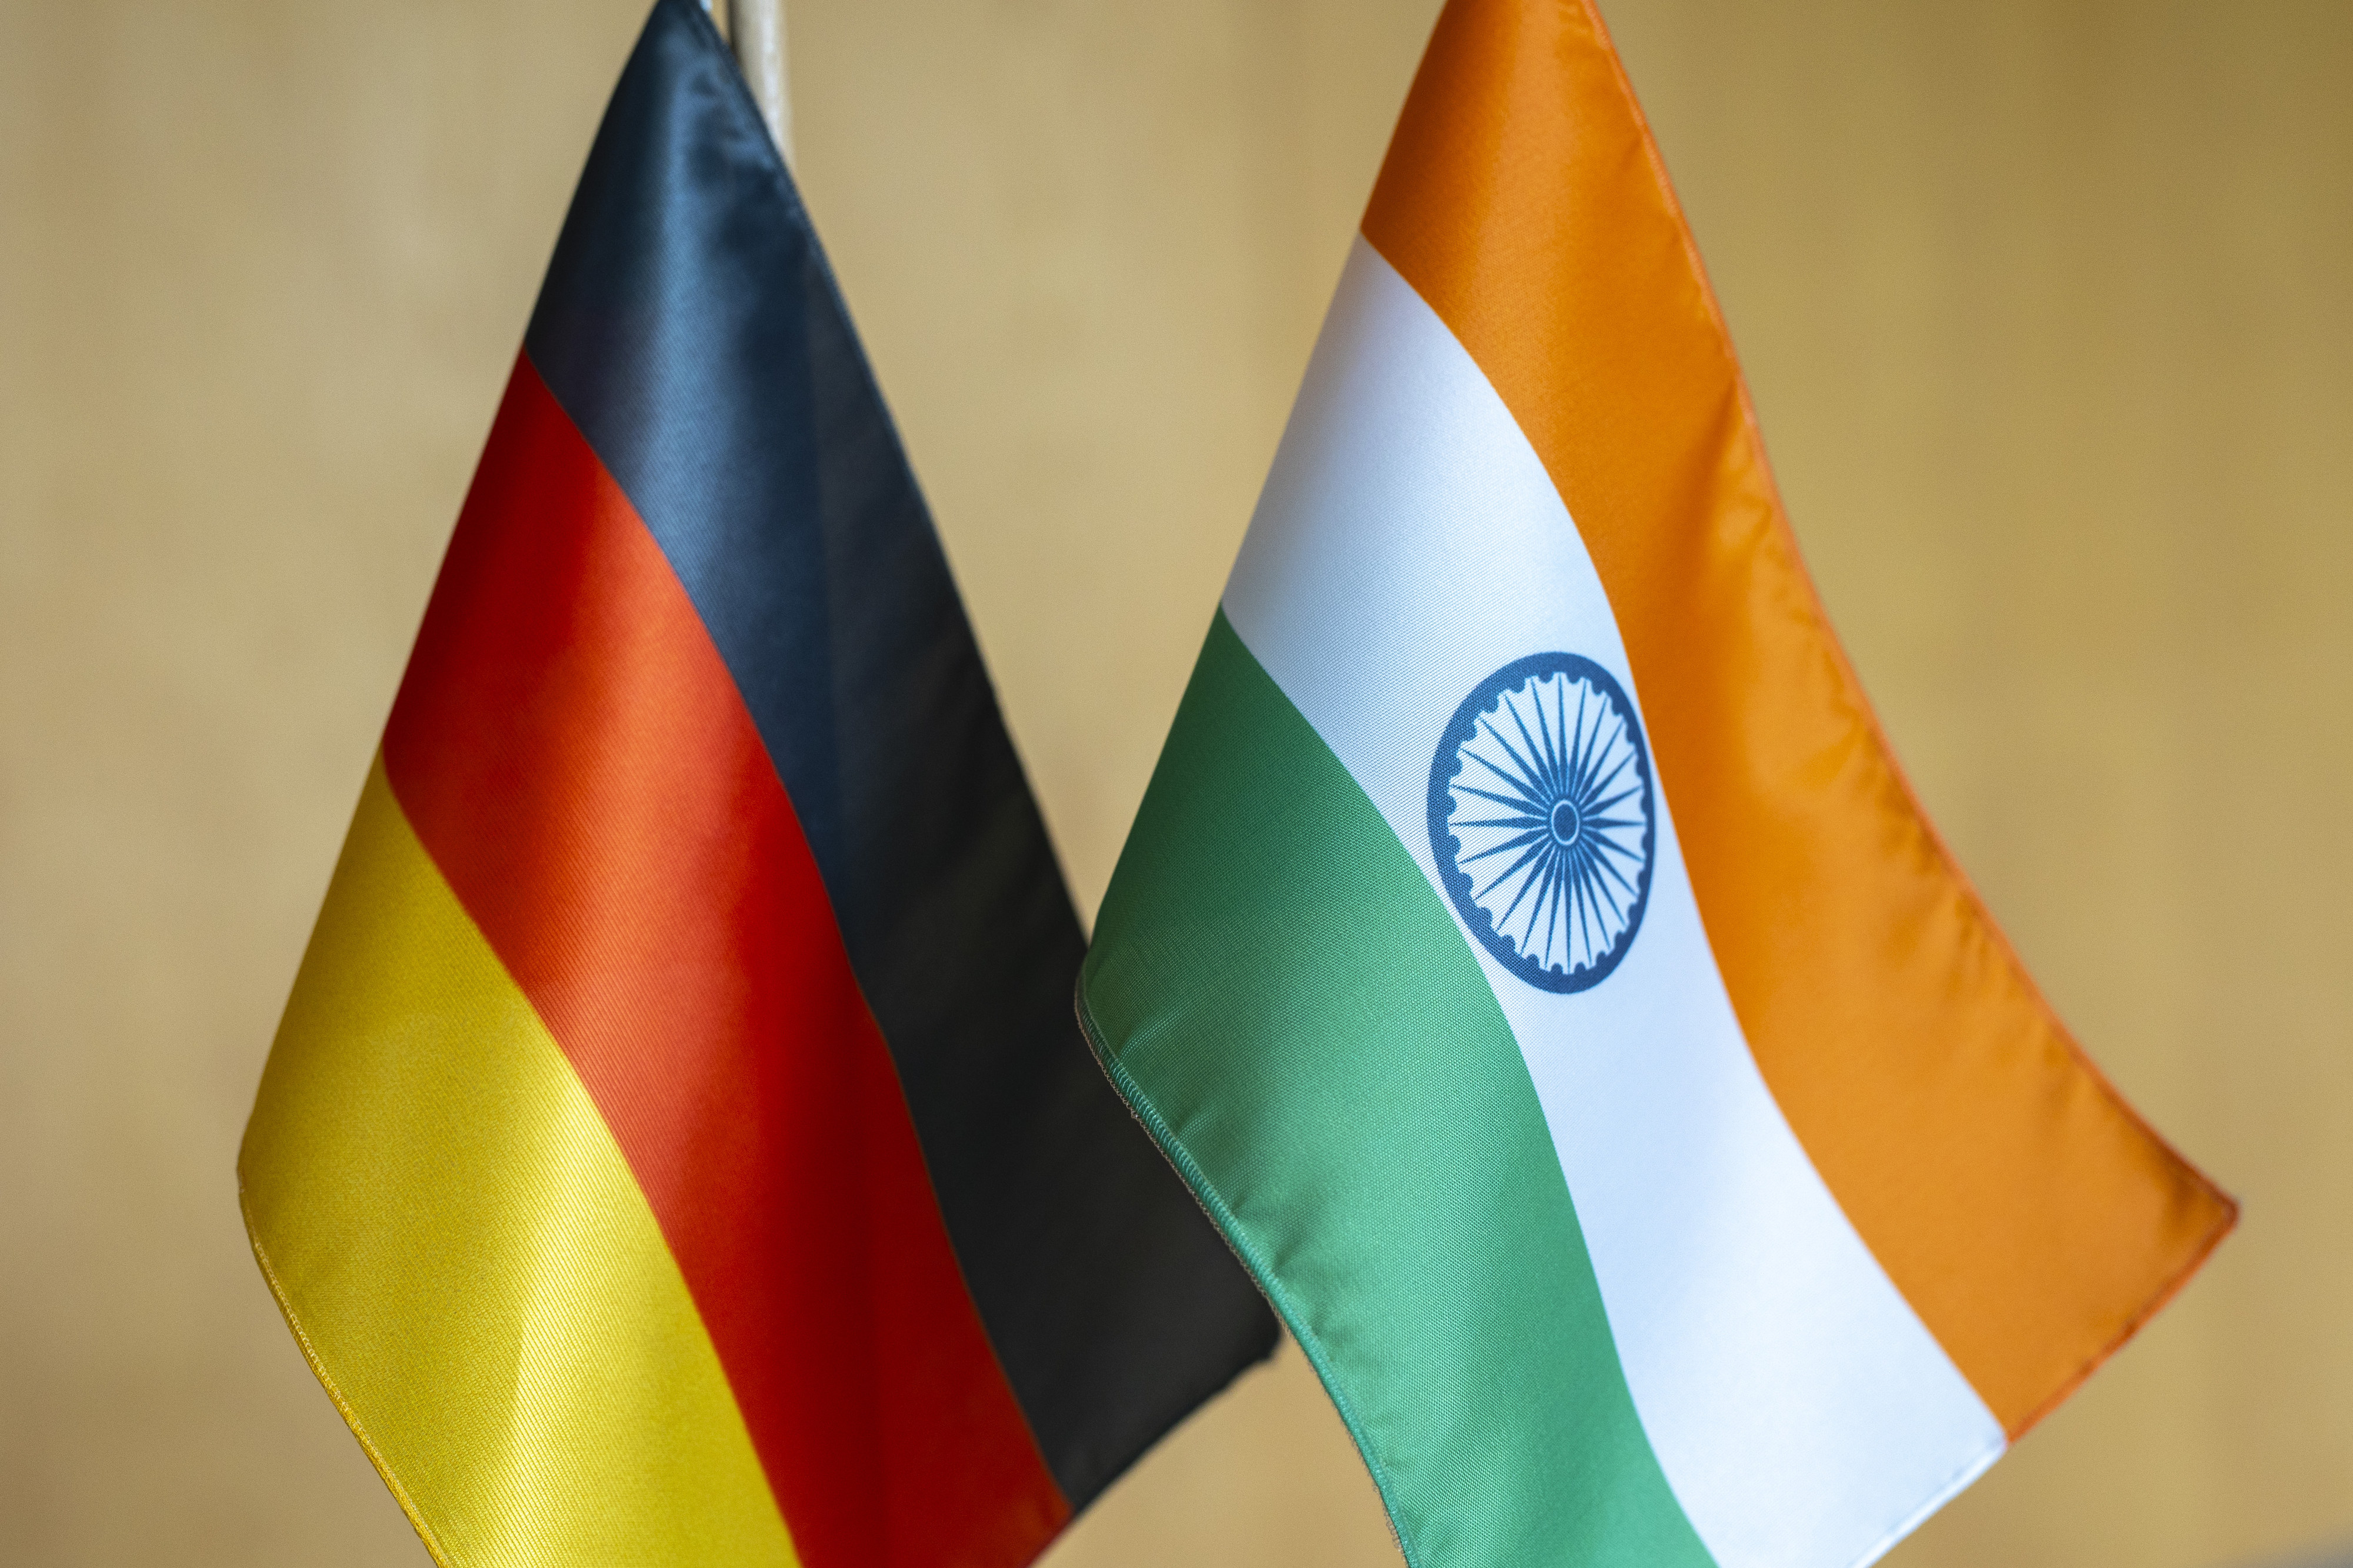 Flags of Germany and India